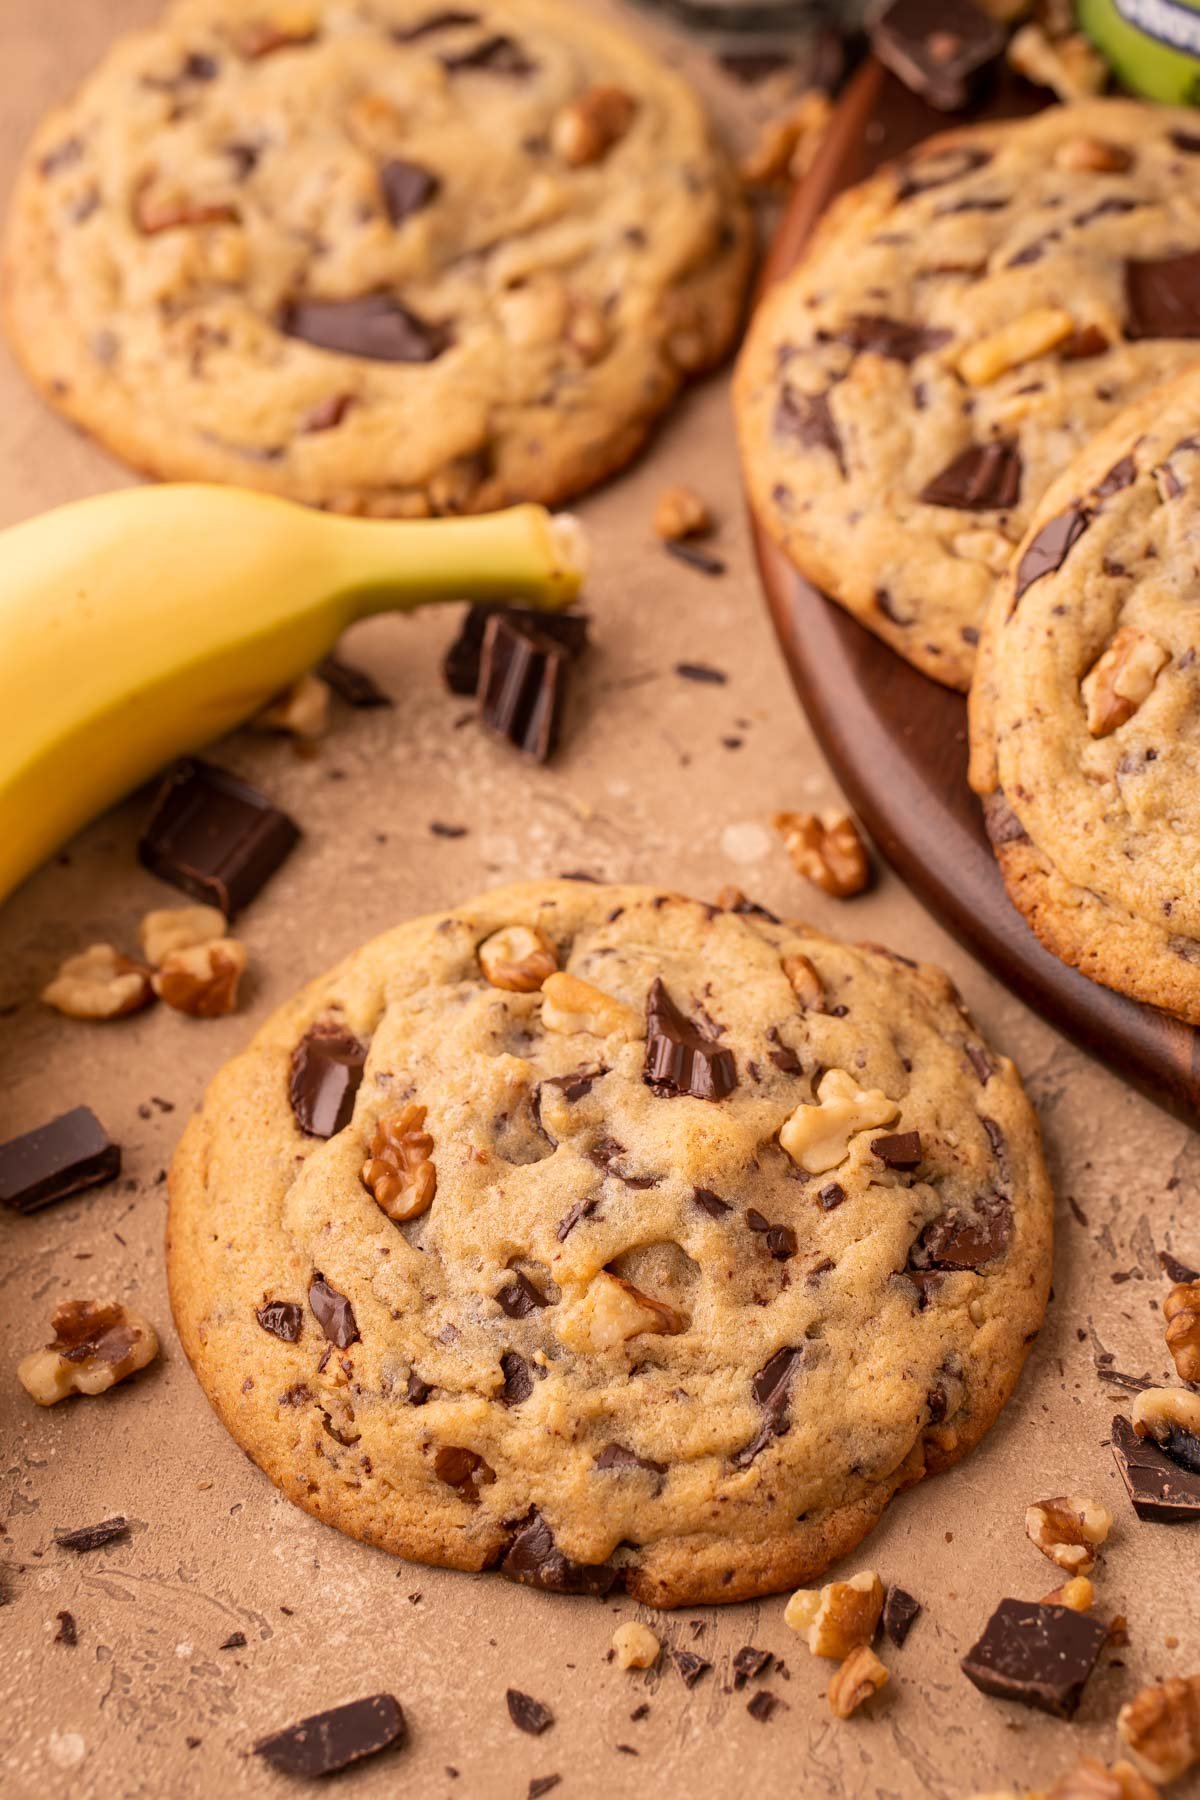 Chunky Monkey Cookies on a table with chocolate, walnuts, and banana around it.